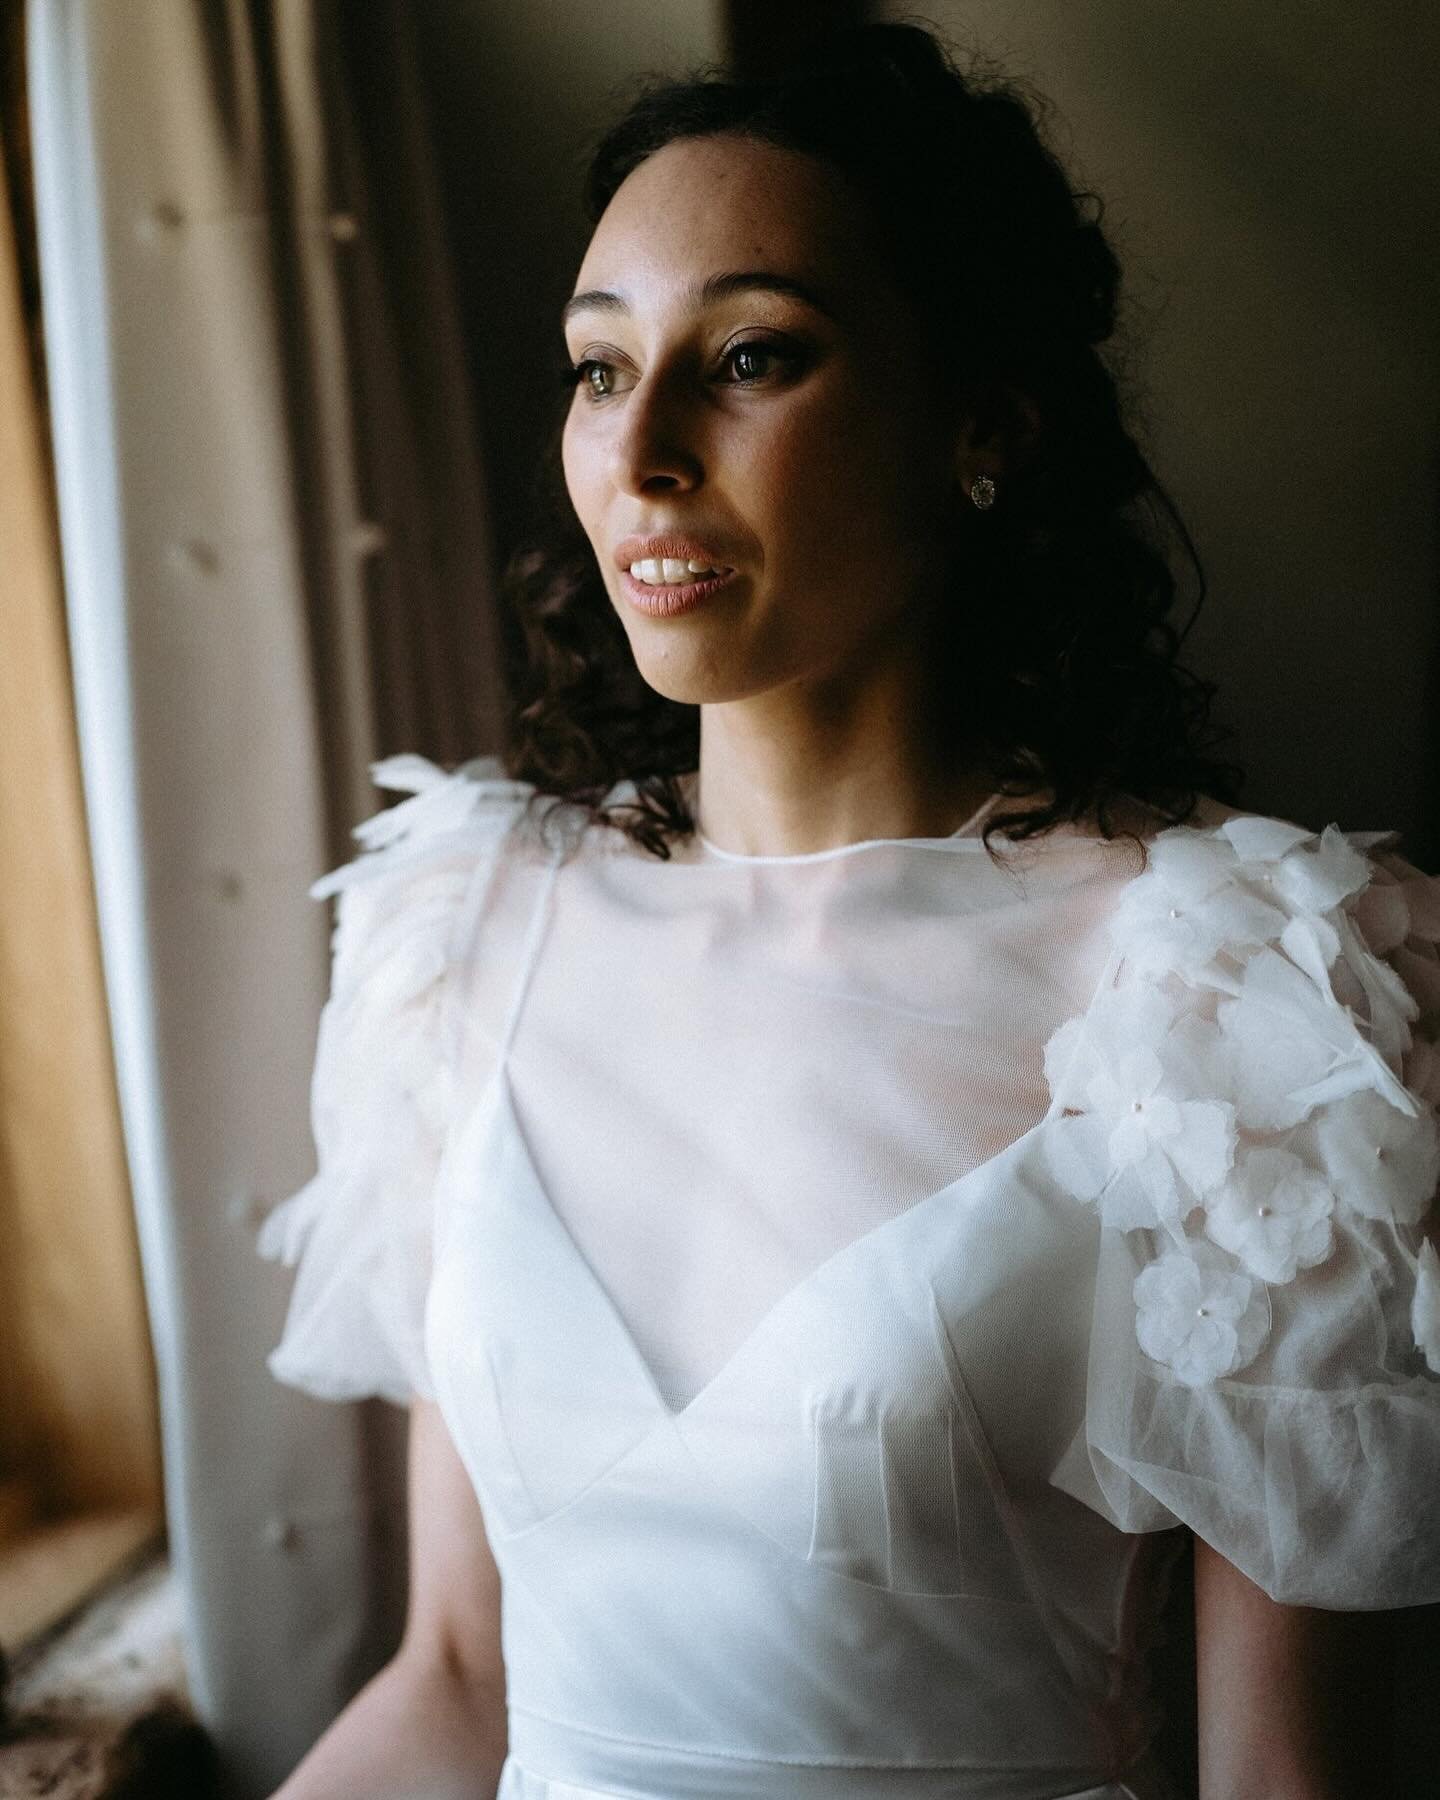 &ldquo;When I came out of the dressing room and looked at myself in the mirror I felt like a bride, then the overwhelming feeling washed over me of just feeling like me.&rdquo;

Stunning Clarissa chose our Ash dress paired with the Boston top for her